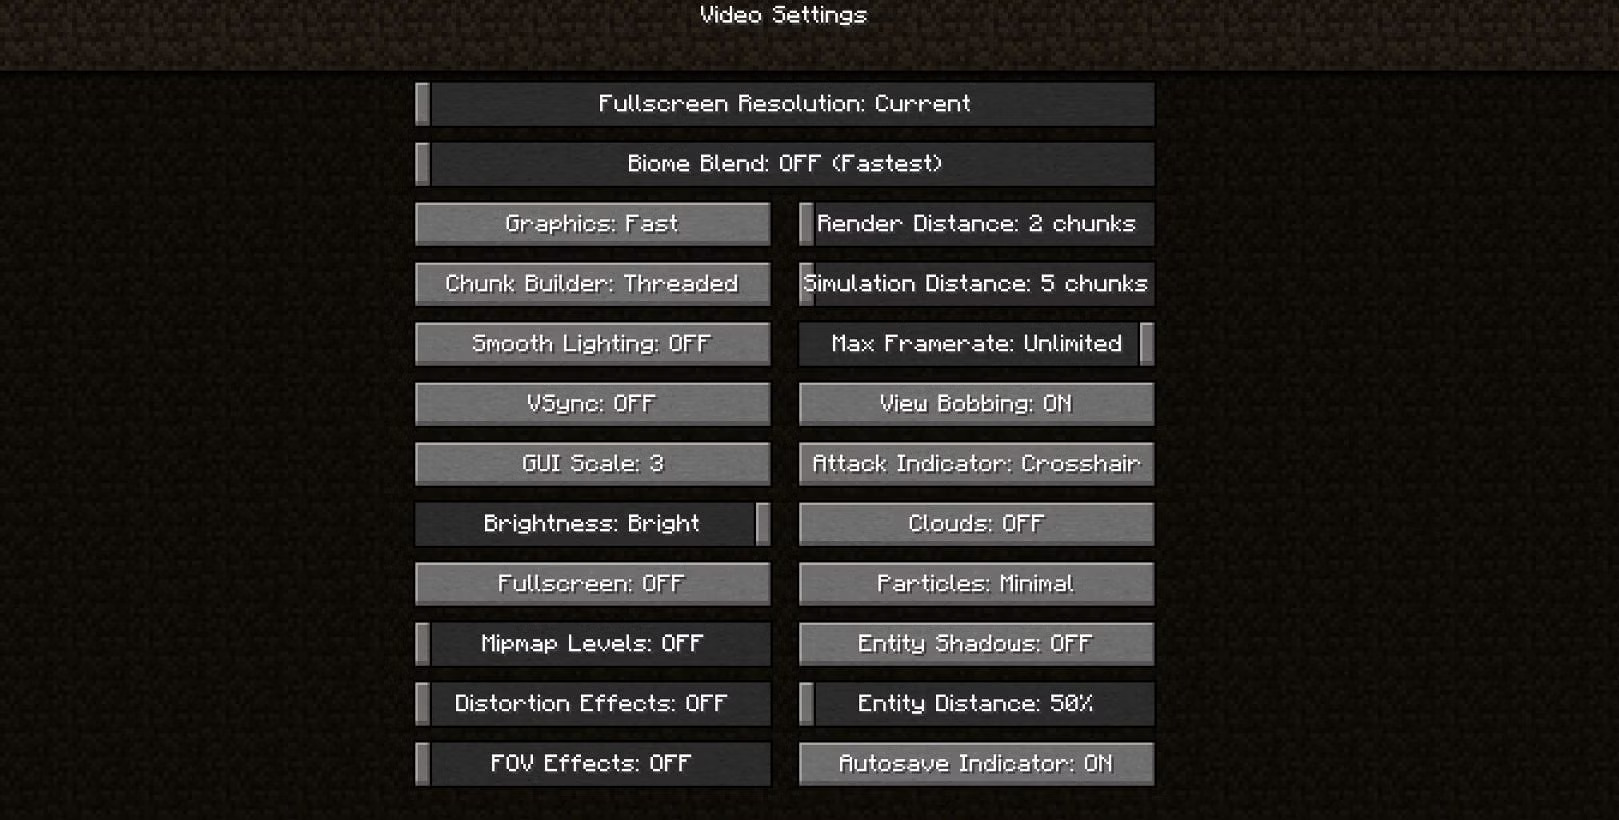 Change Video Settings in Minecraft